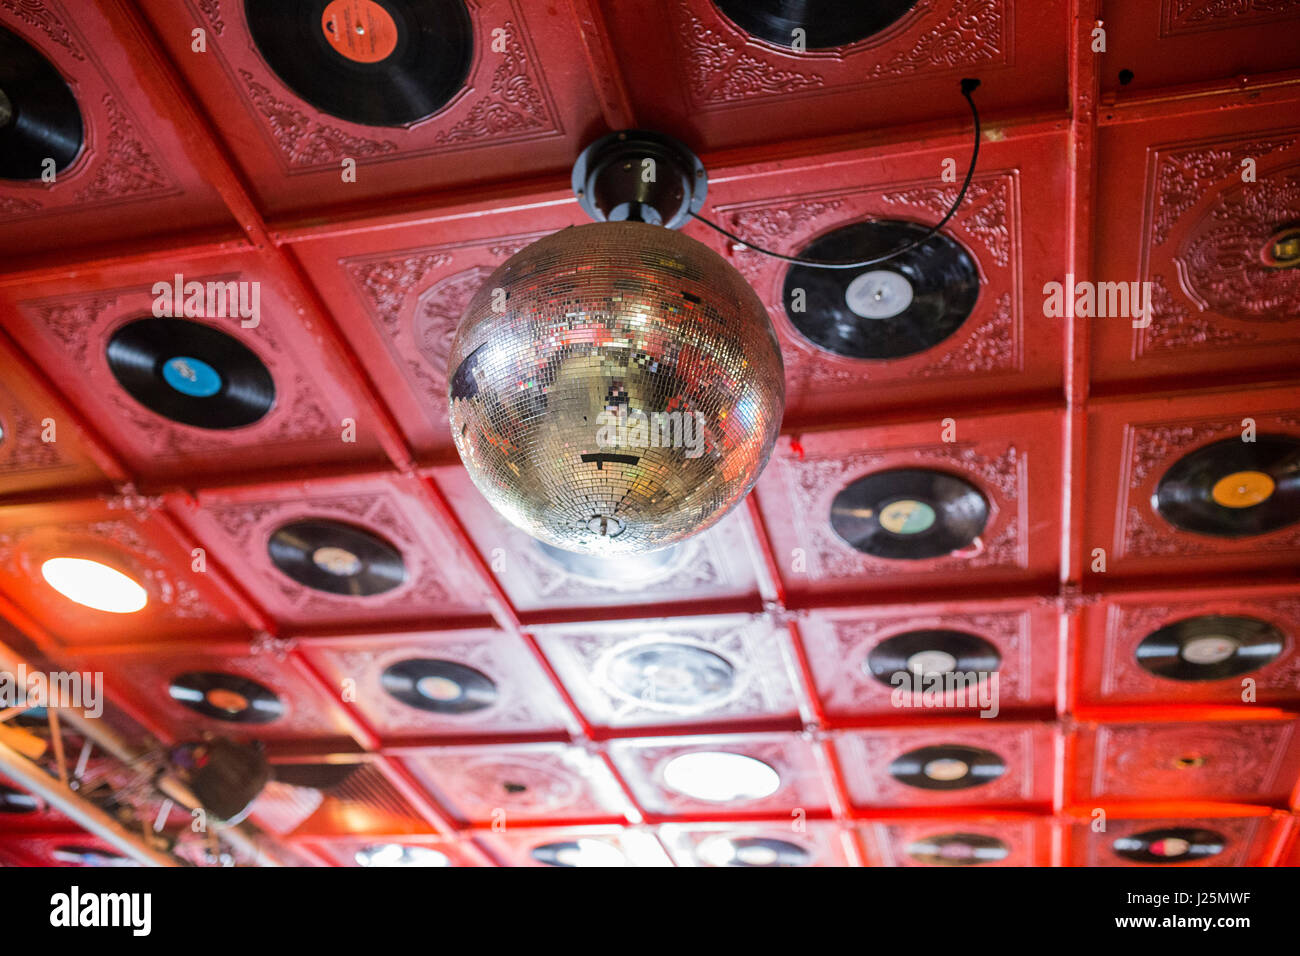 Detail of mirror ball attached to red ceiling with 12' vinyl records embedded in it, in the main room at Molotow club in Hamburg. Stock Photo